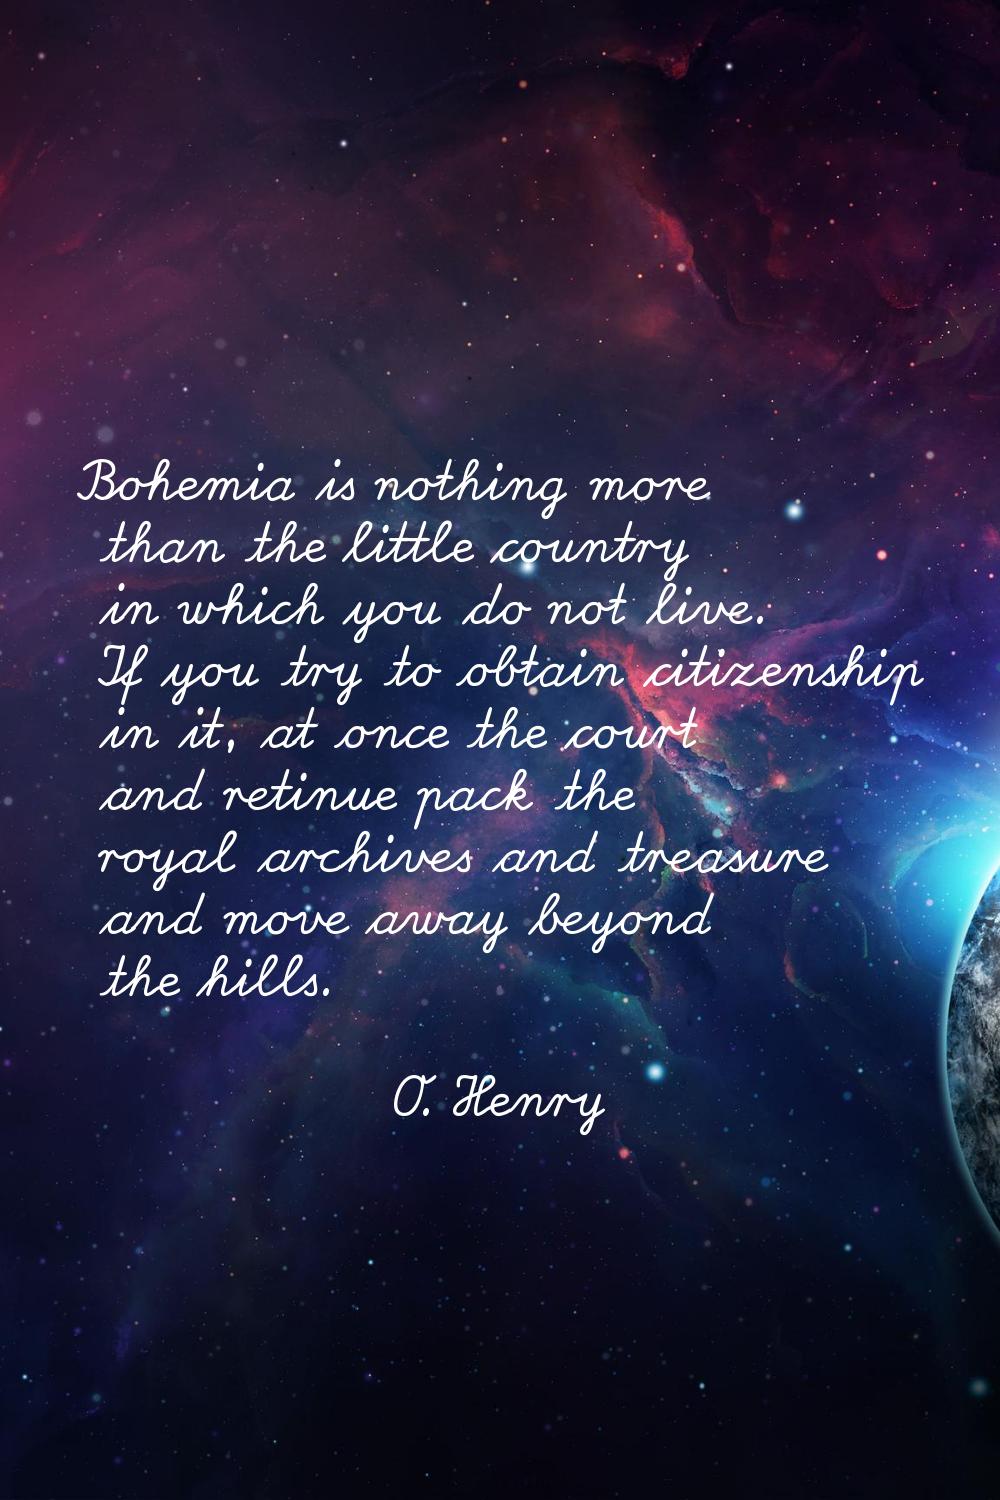 Bohemia is nothing more than the little country in which you do not live. If you try to obtain citi